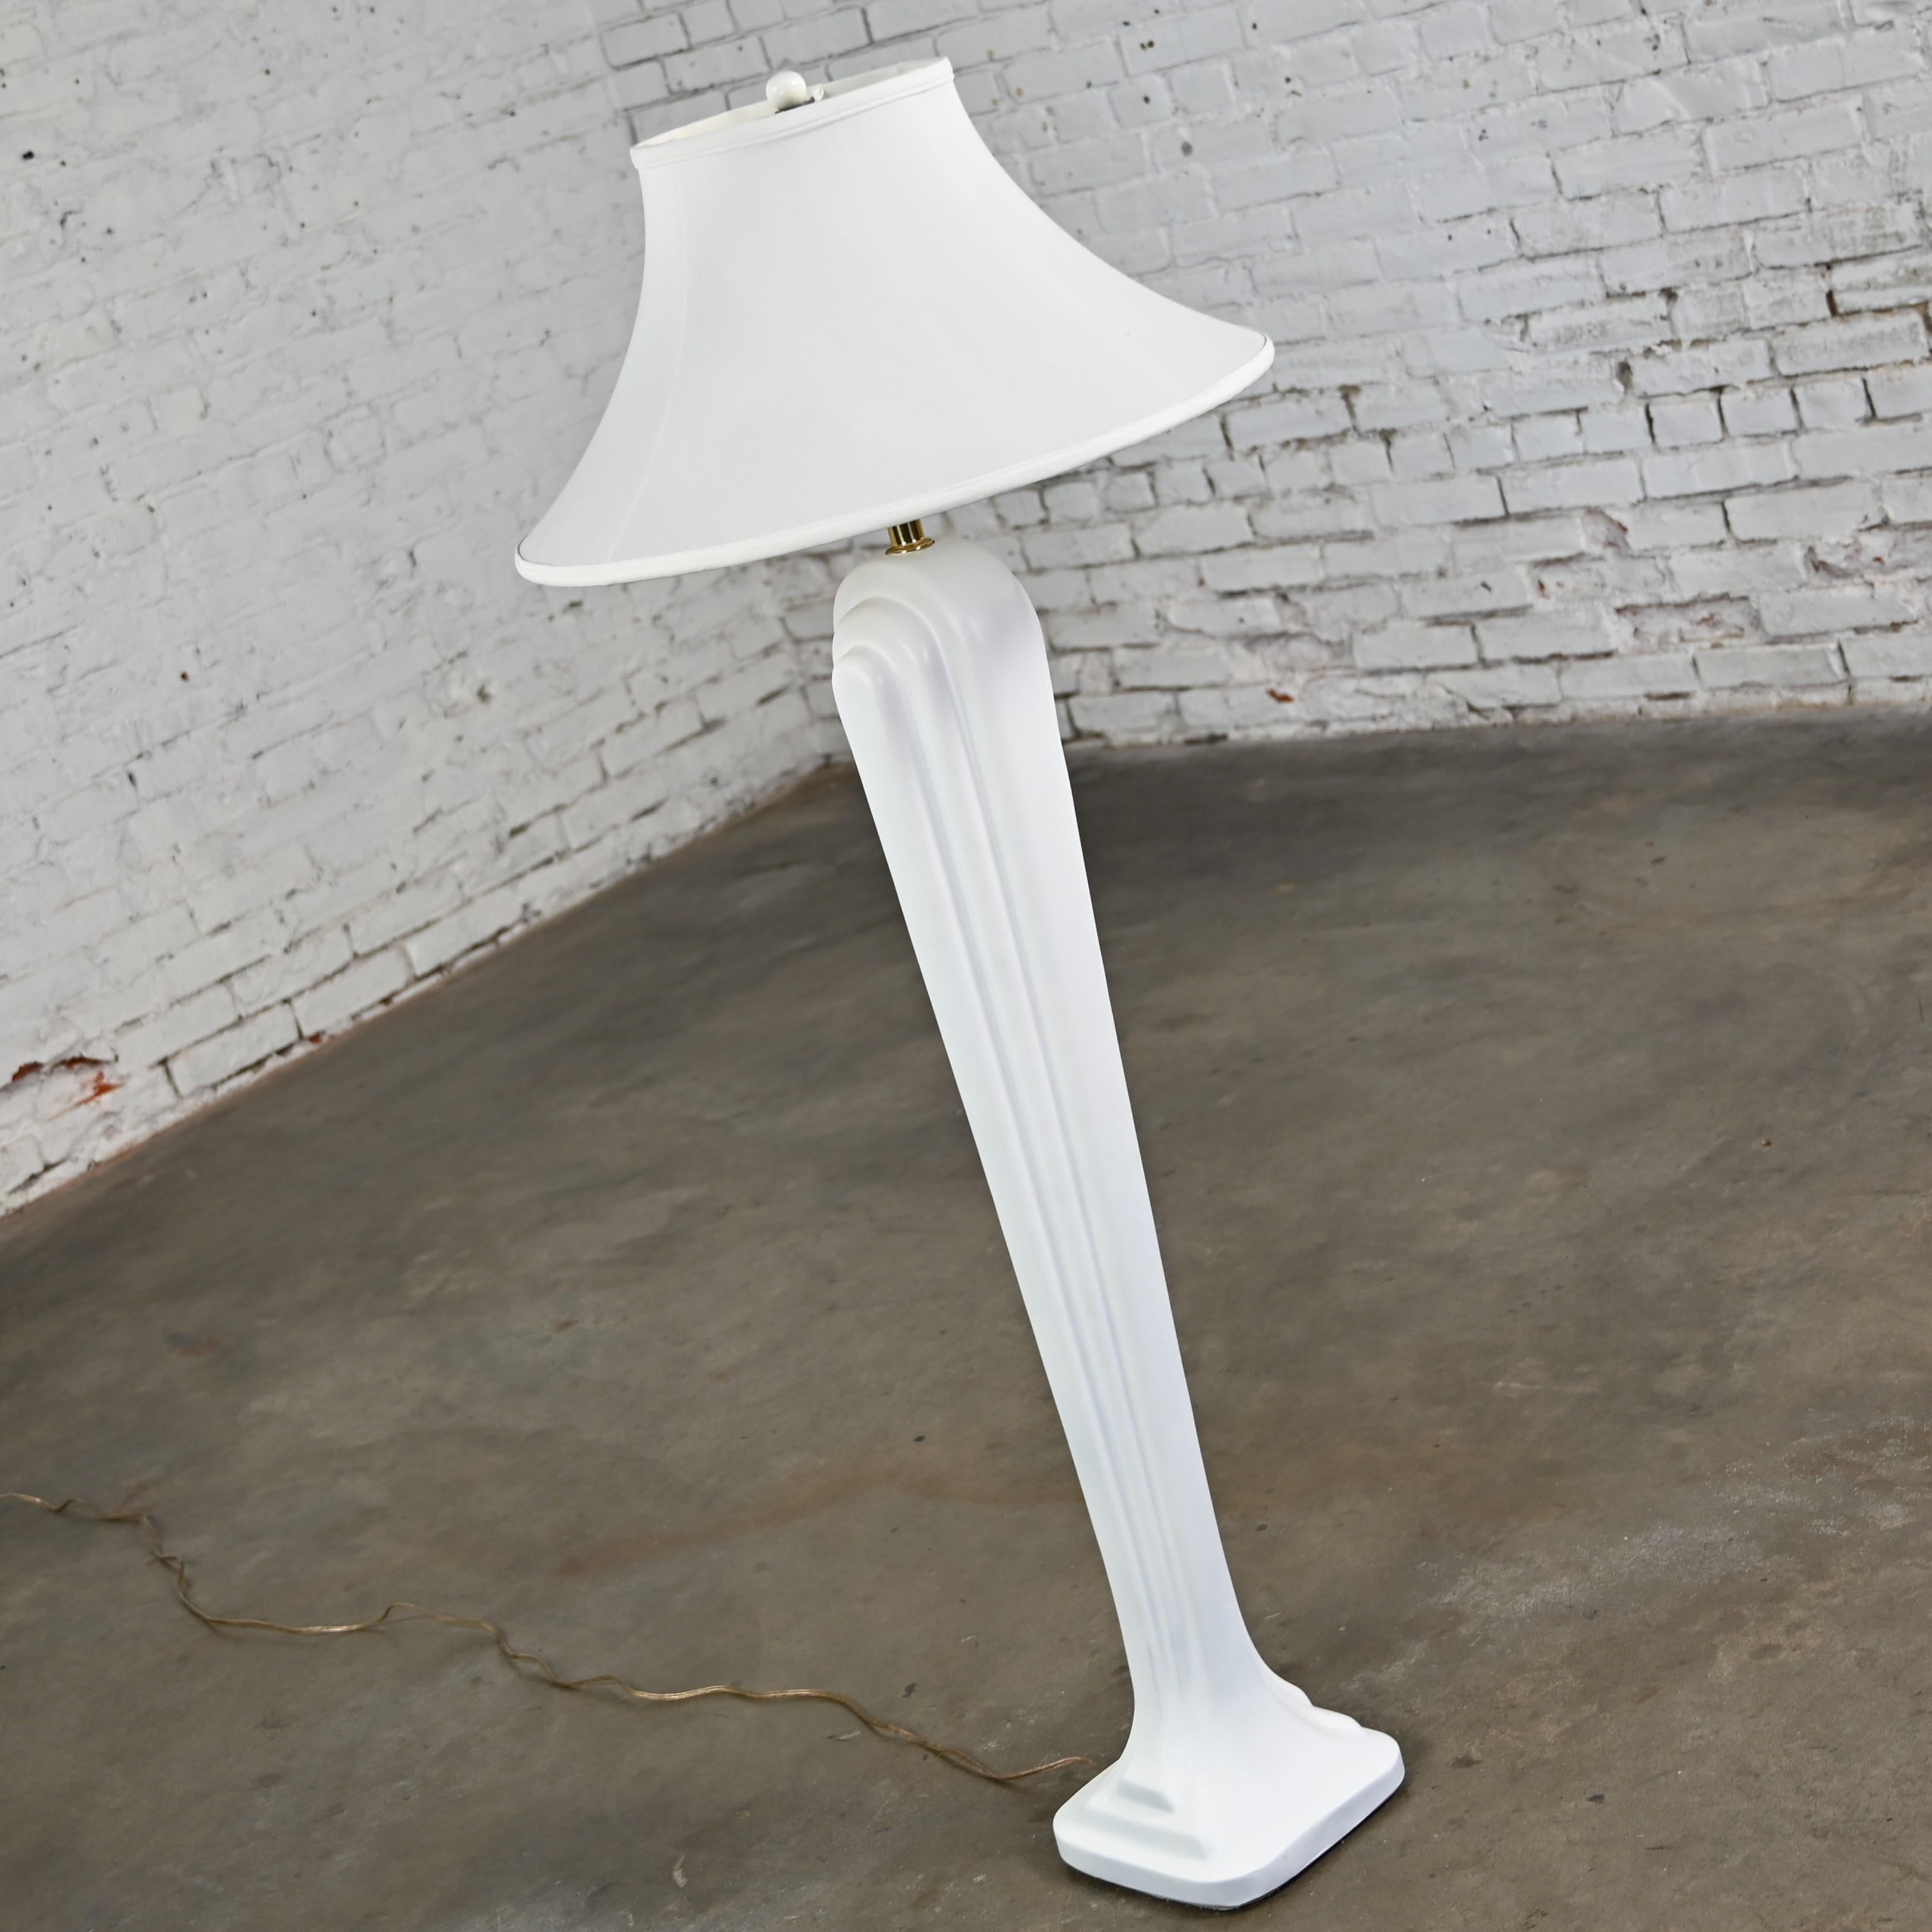 Art Deco Revival to Postmodern Paolo Gucci Floor Lamp White Sculpted Resin  For Sale 4